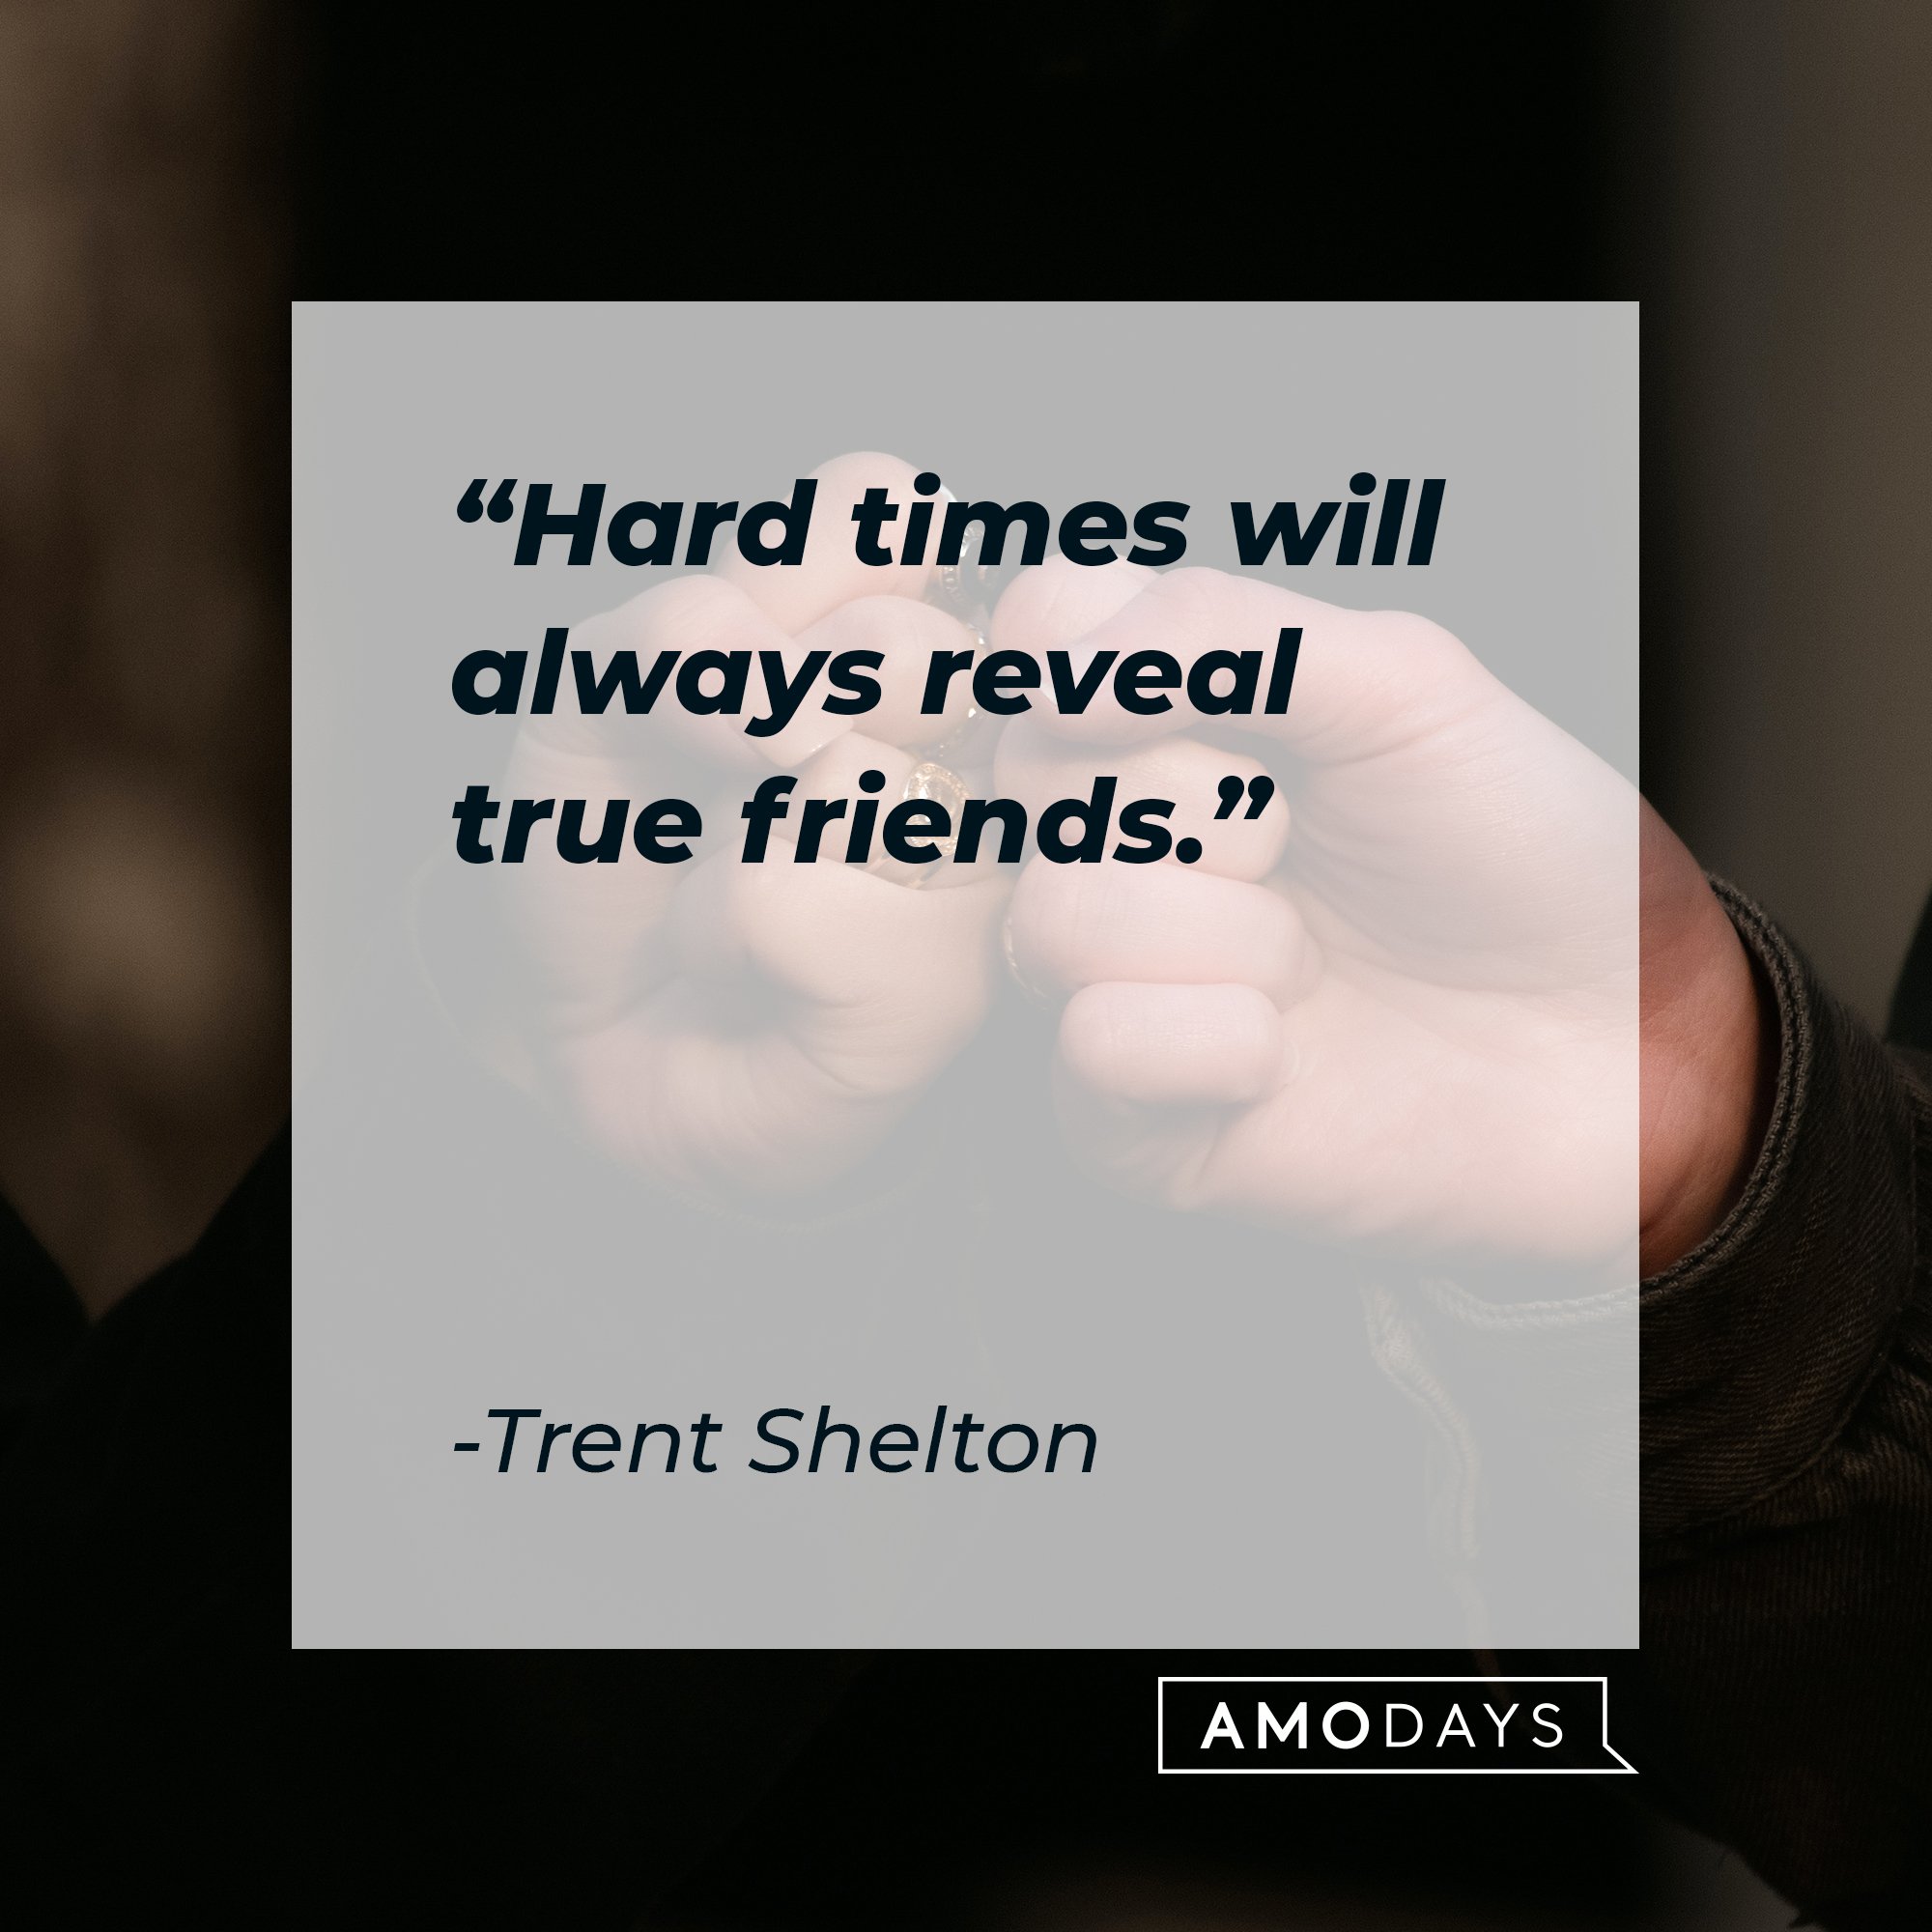  Trent Shelton's quote: "Hard times will always reveal true friends." | Image: AmoDays